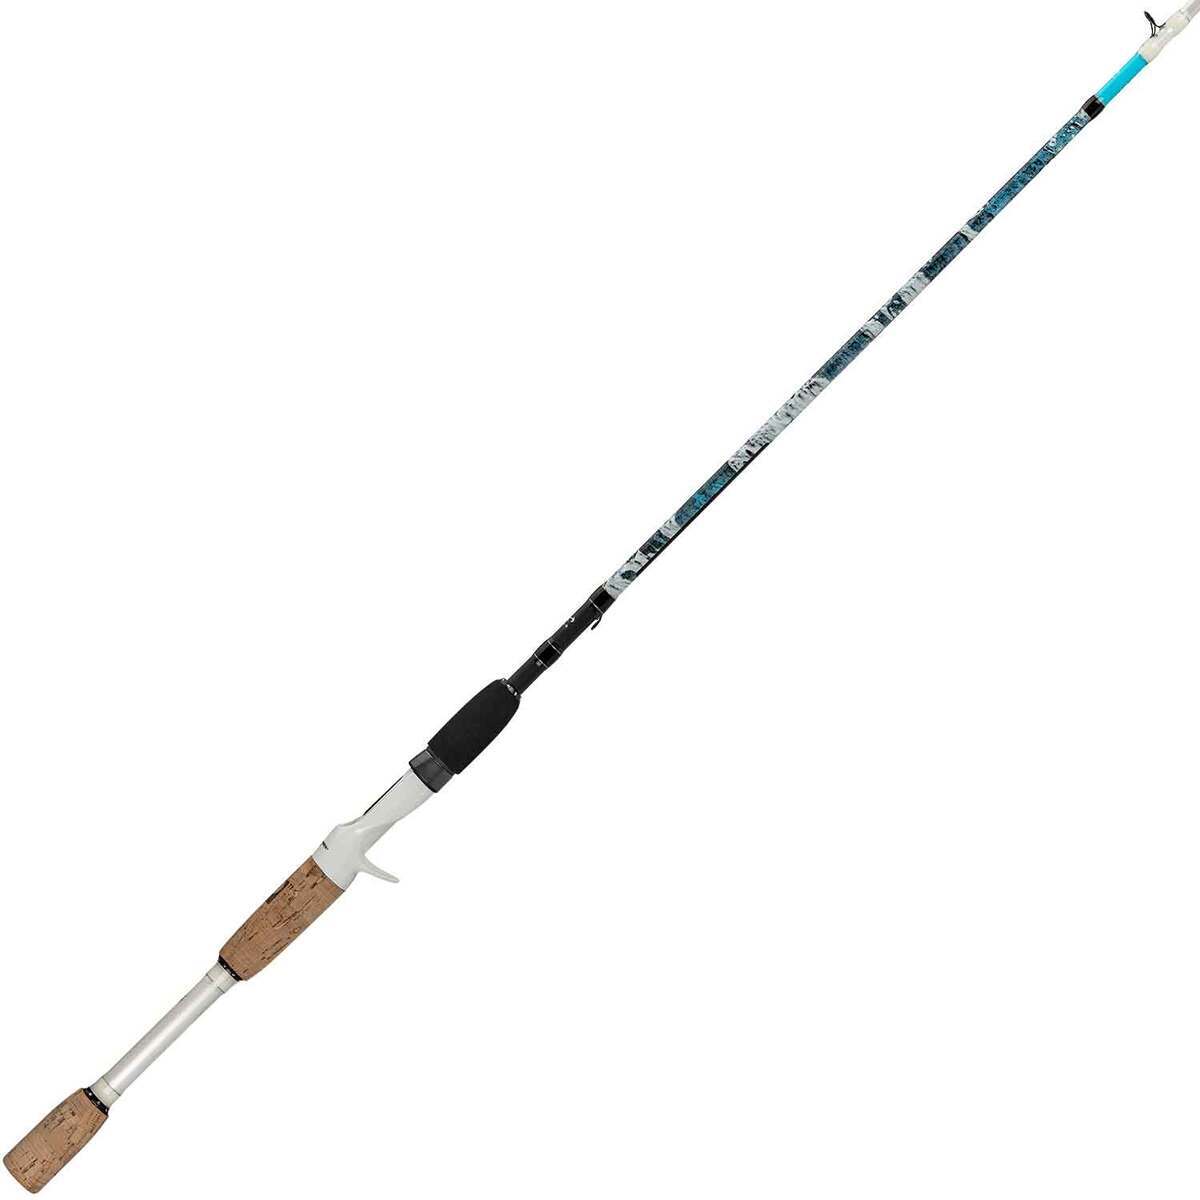 Profishiency David Dudly Signature Series Spinning Rod - 7ft 2in